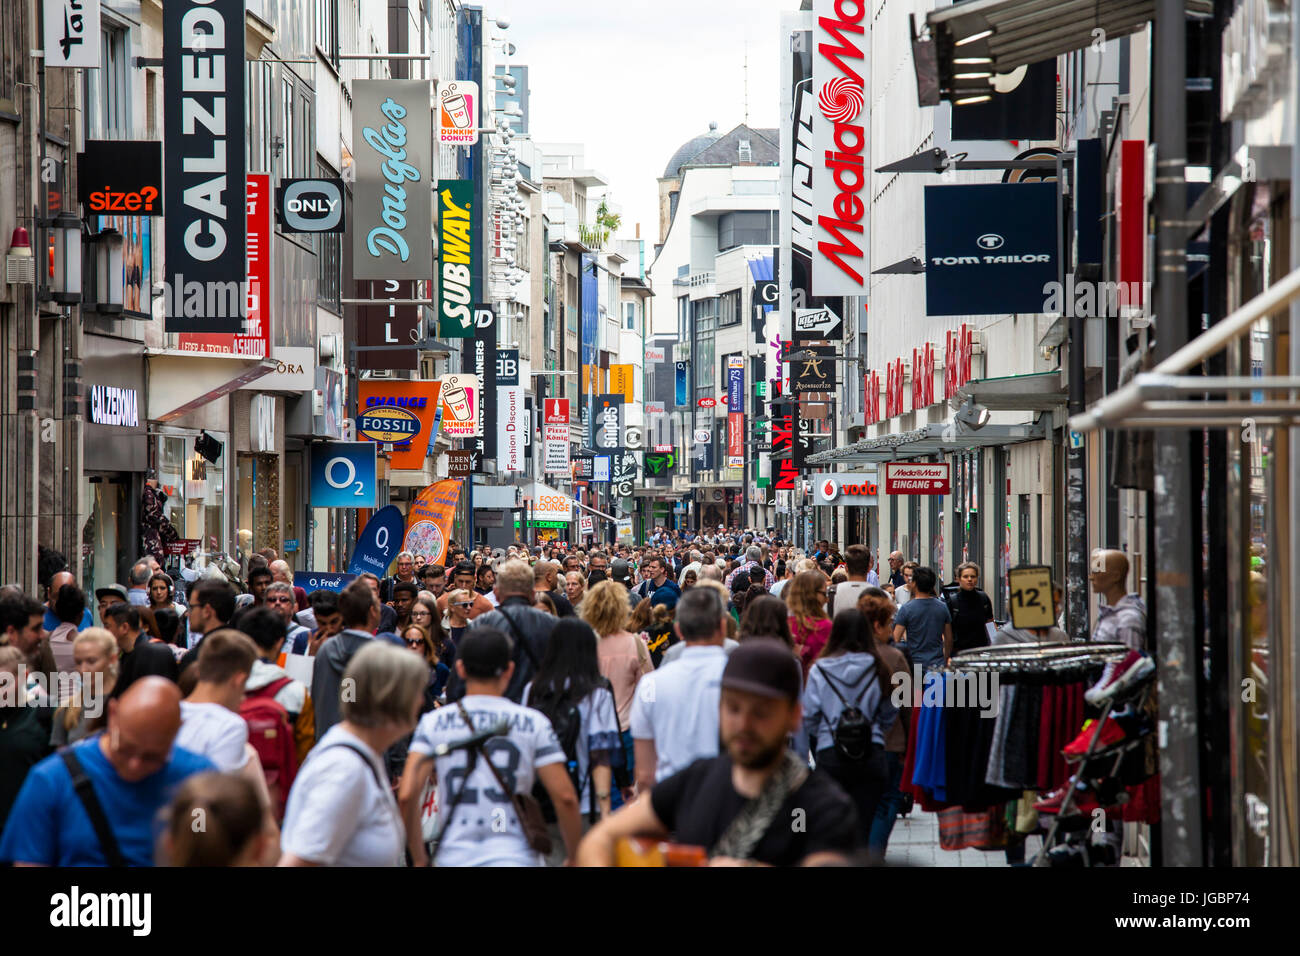 Europe, Germany, Cologne, the shopping street Hohe Strasse. Stock Photo